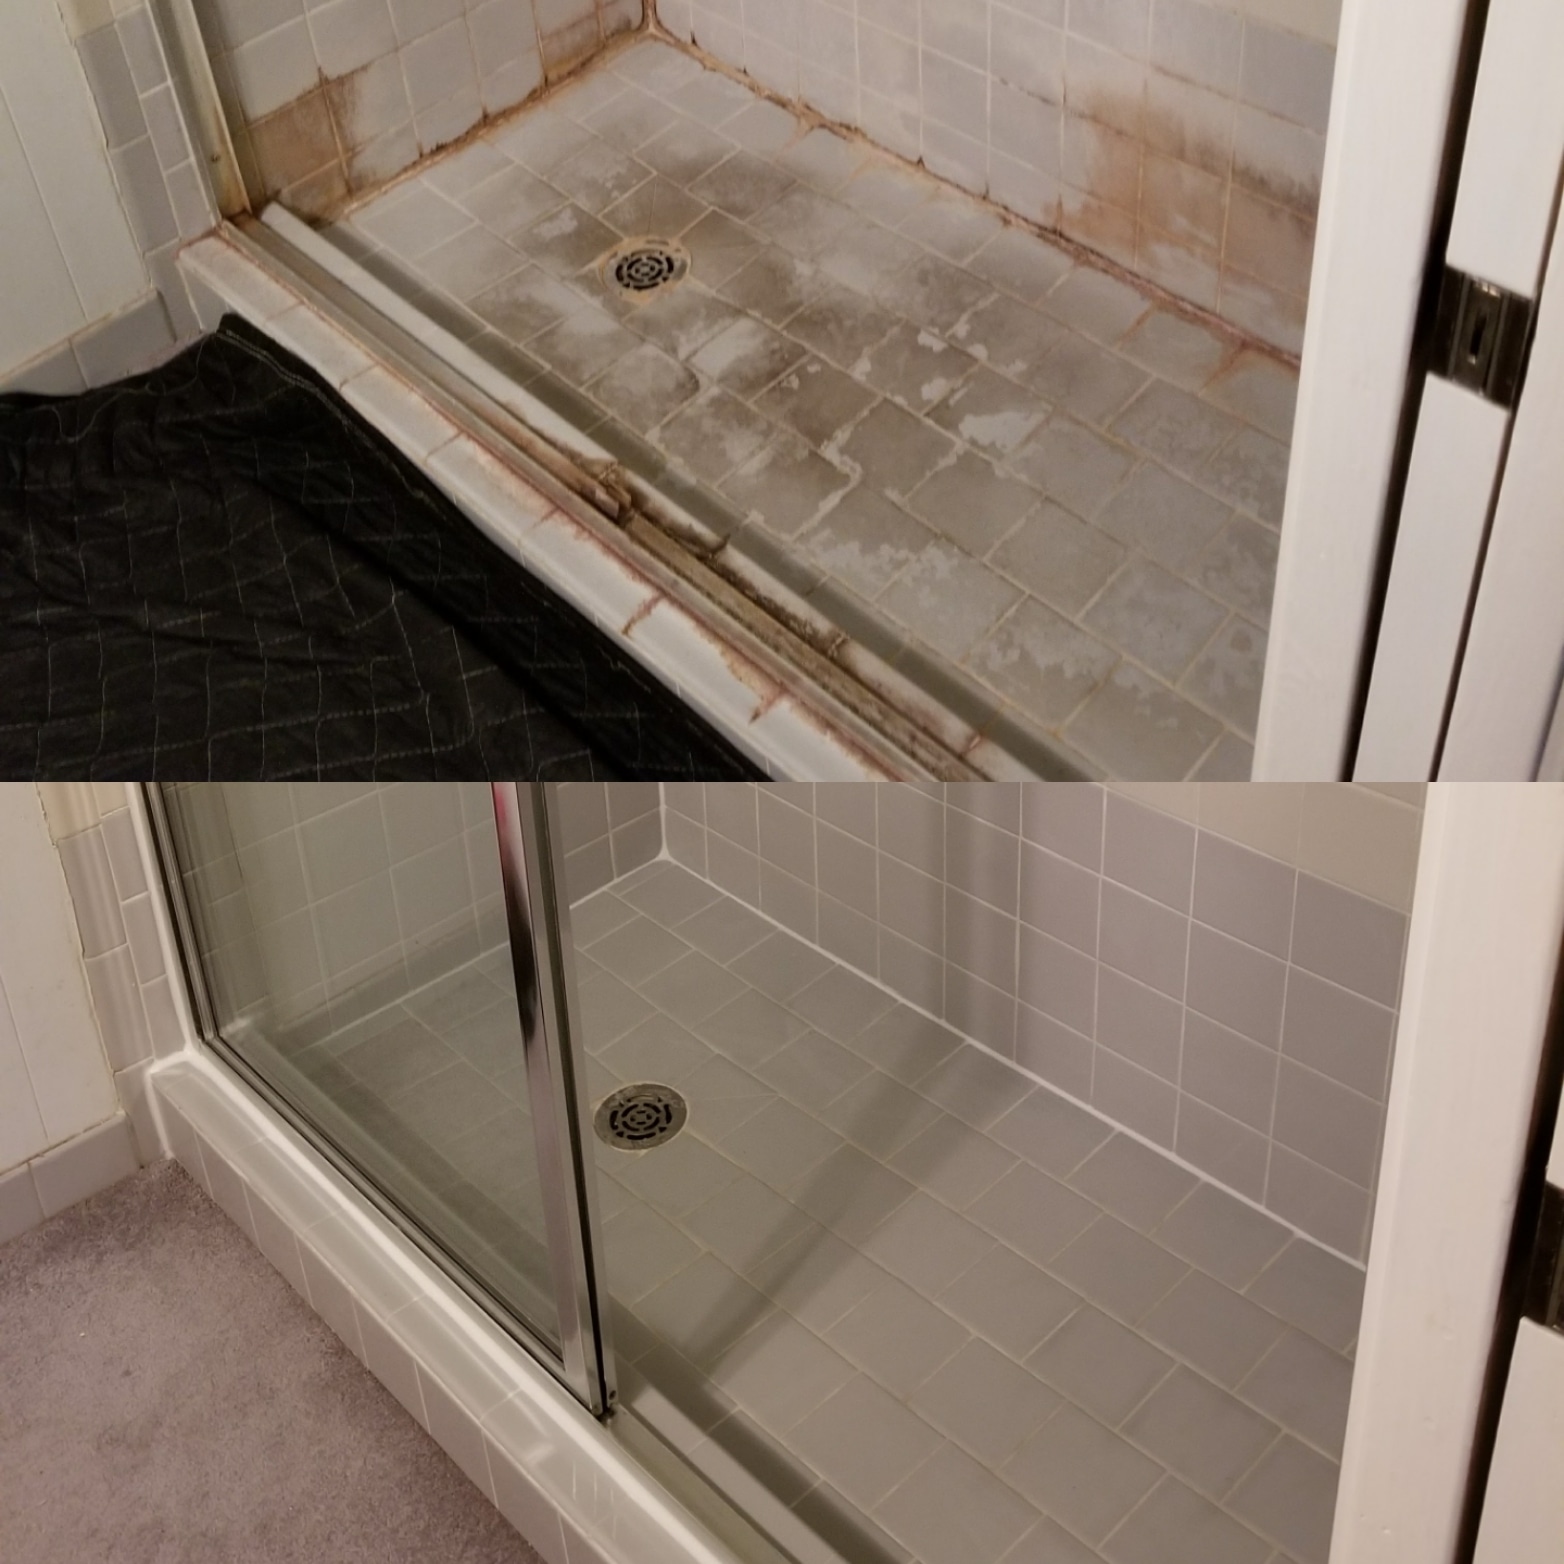 bathroom cleaning before and after comparison in Plano Texas